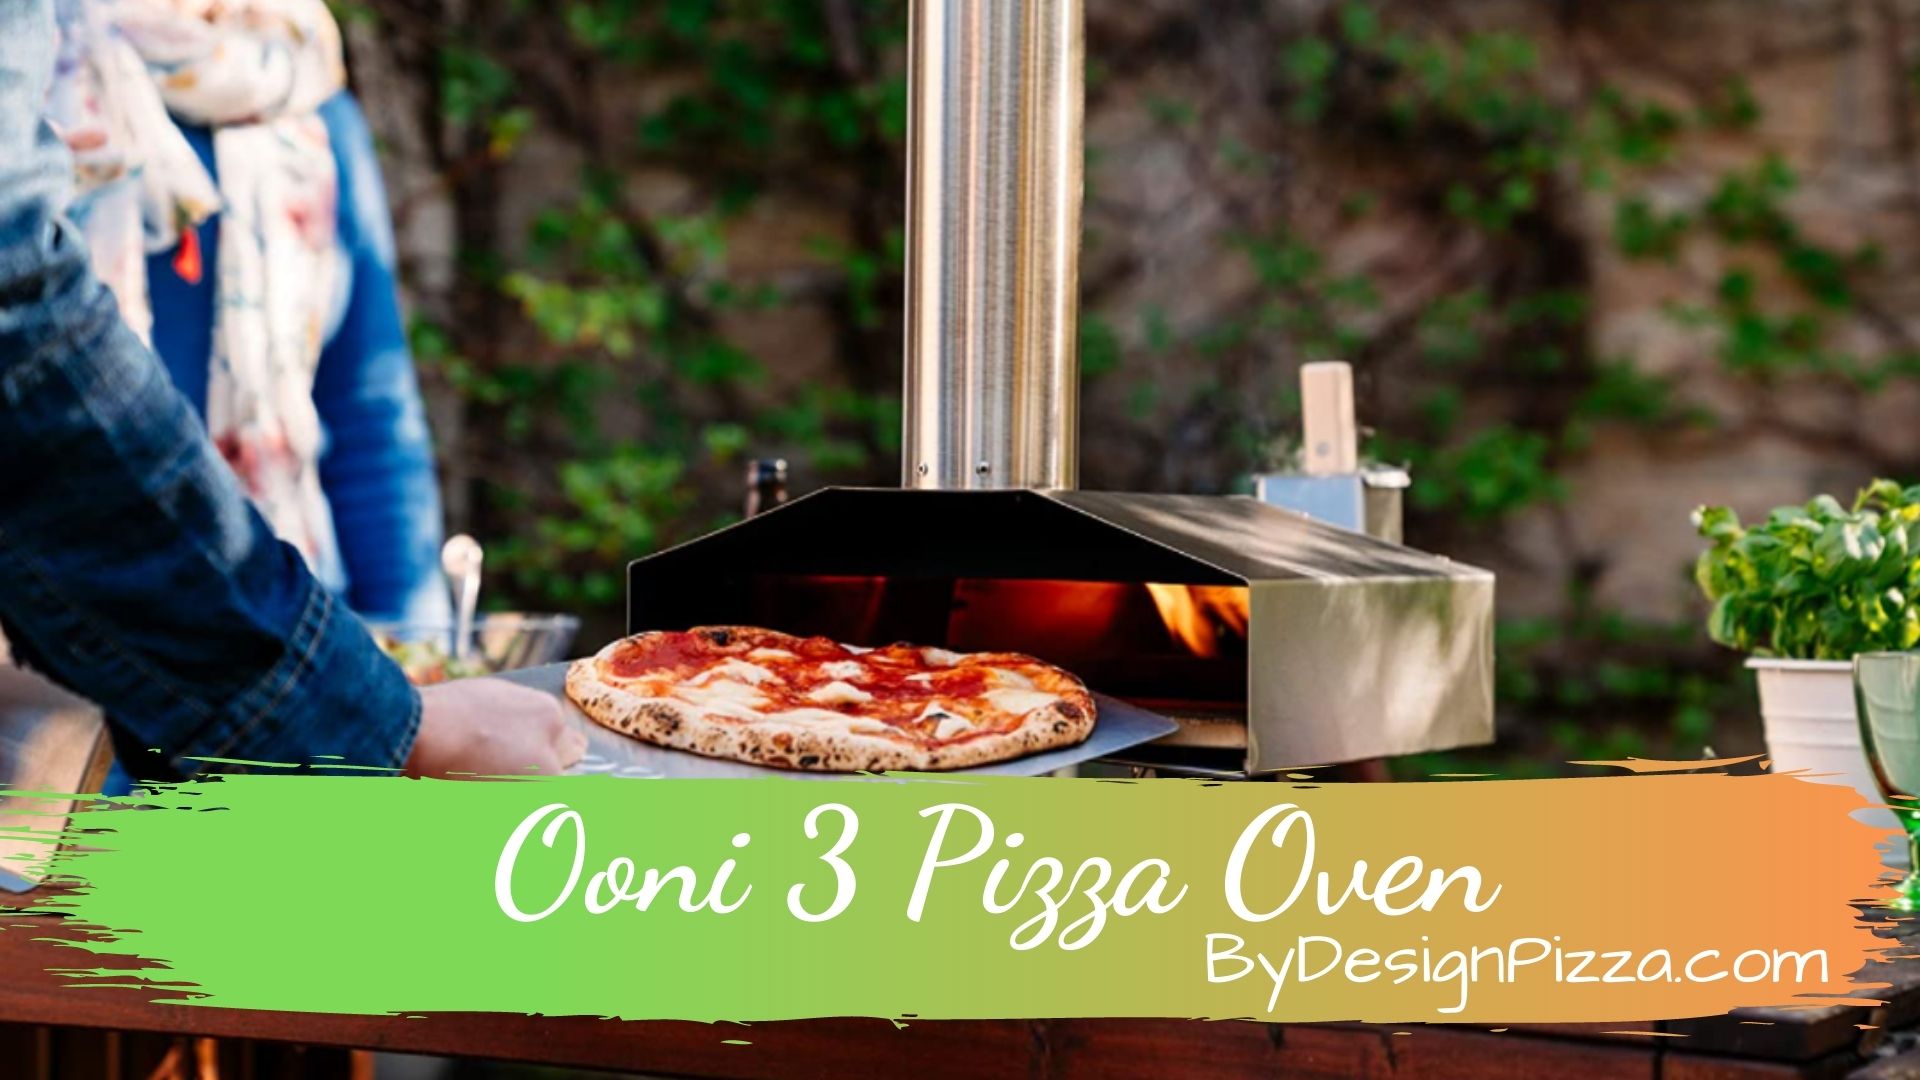 Award Winning Ooni 3 Pizza Oven Portable Oven Pizza Maker Outdoor Pizza Oven Outdoor Cooking 